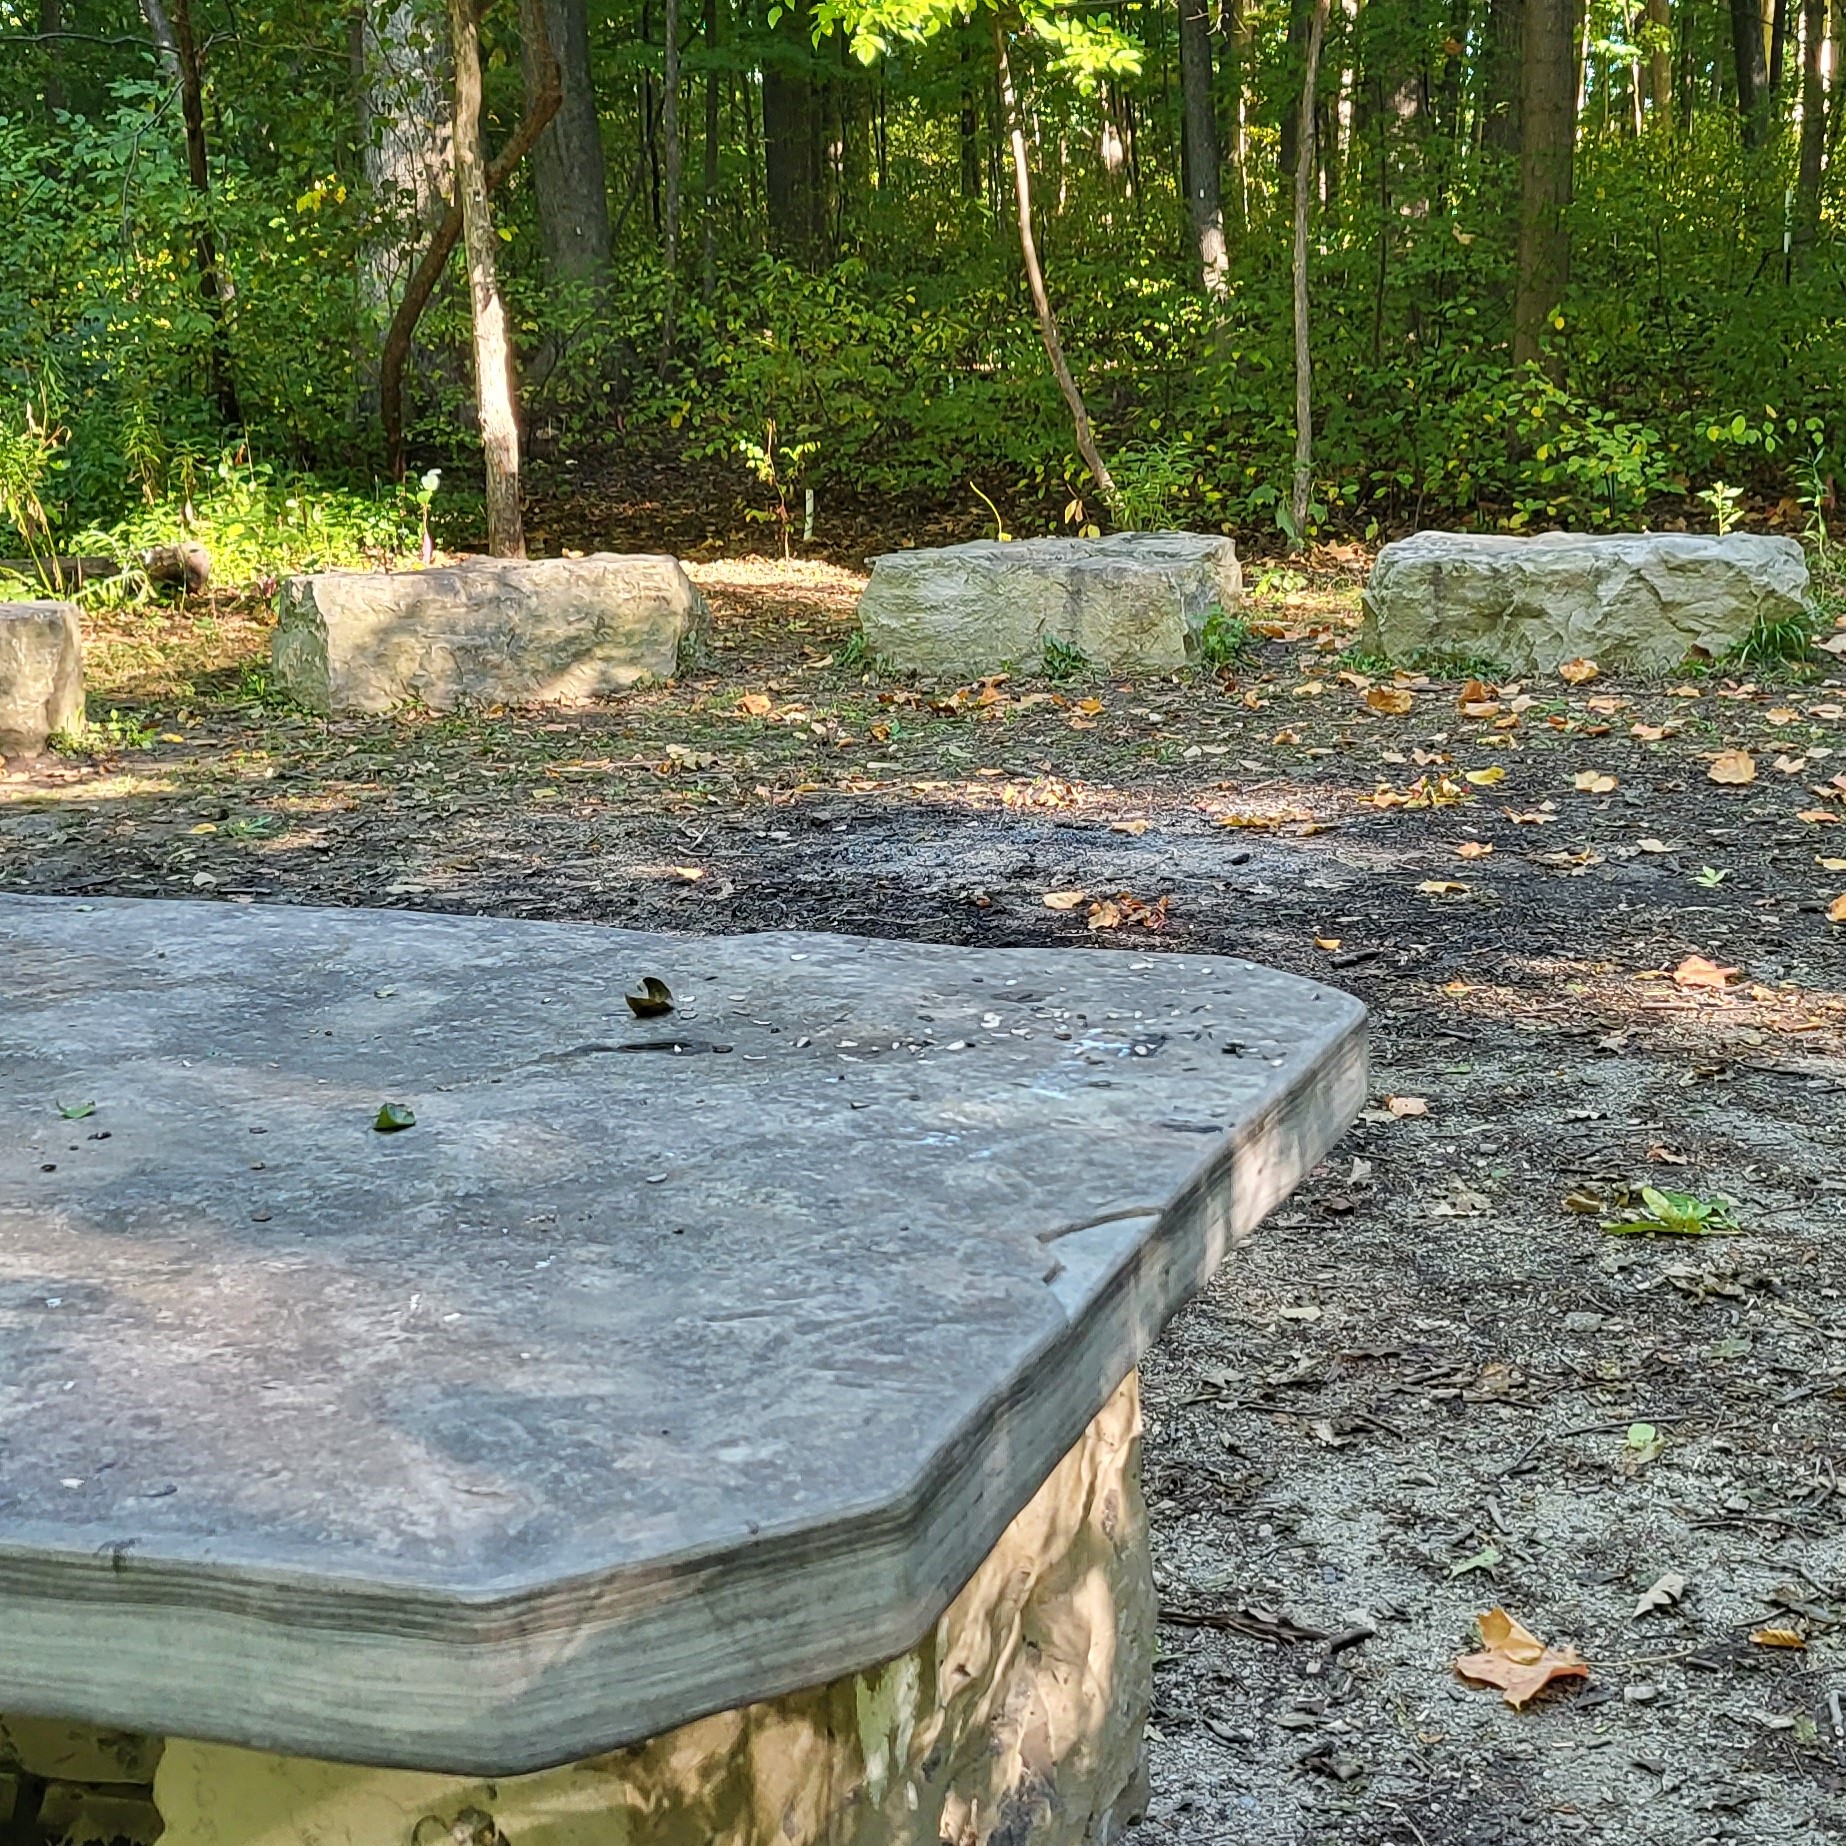 Stone seating surrounded by trees